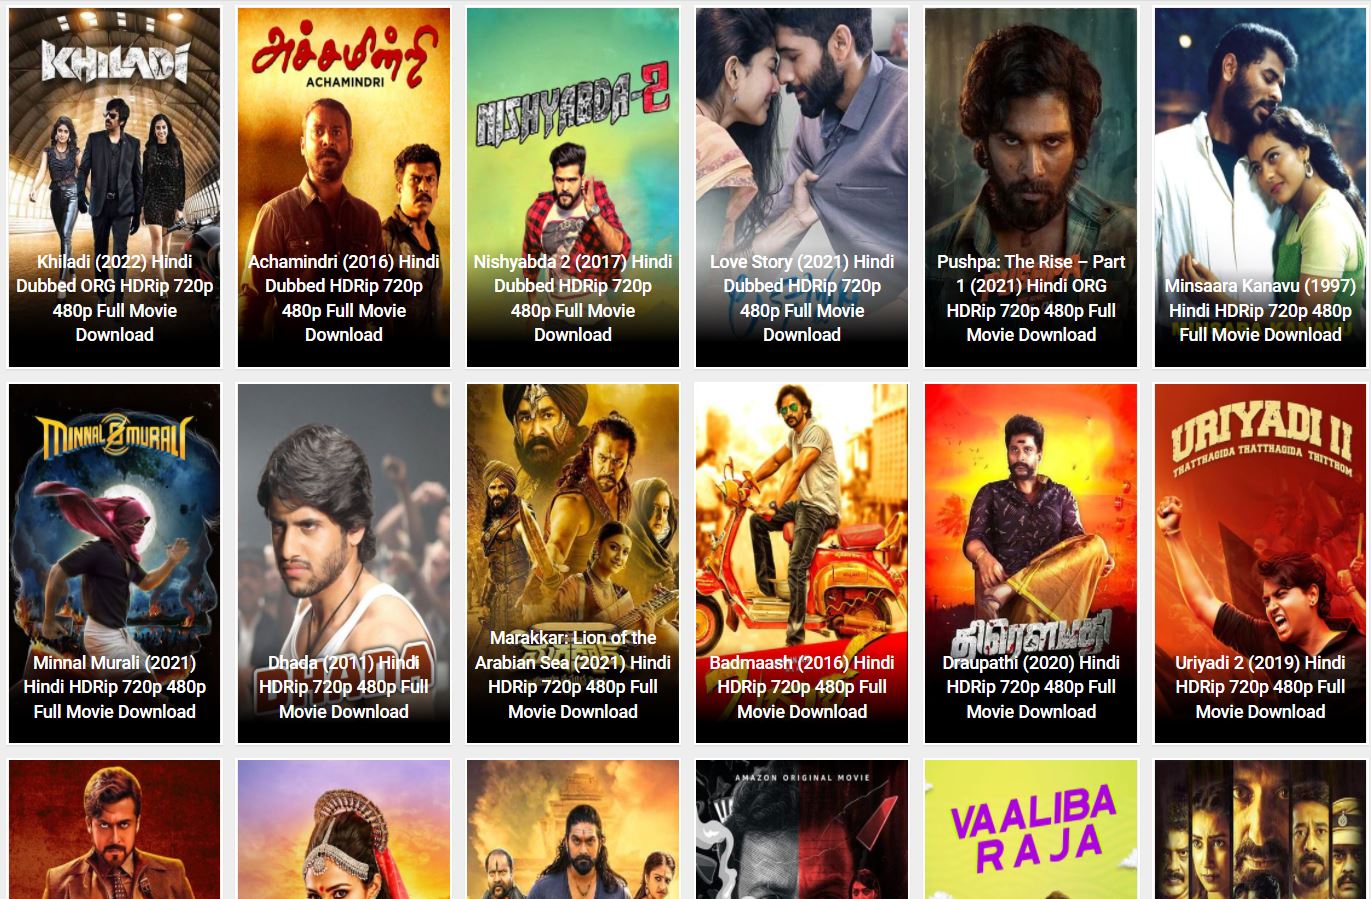 List of South Movies on mkv point website